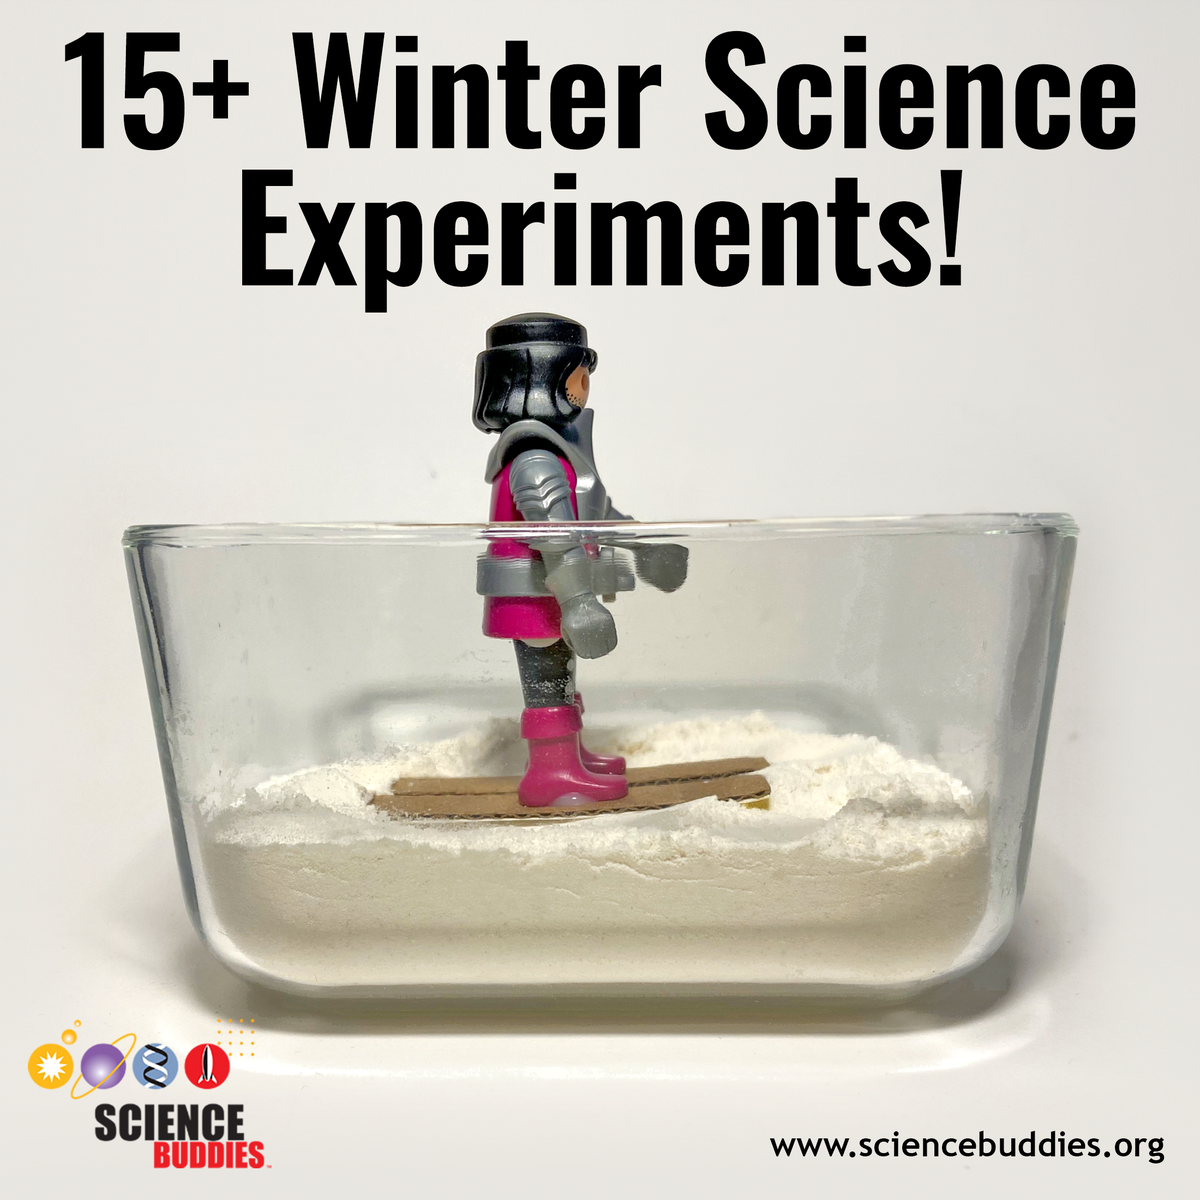 Toy figure on cardboard skis in a container of flour pretend snow for Winter Science Activity at Science Buddies